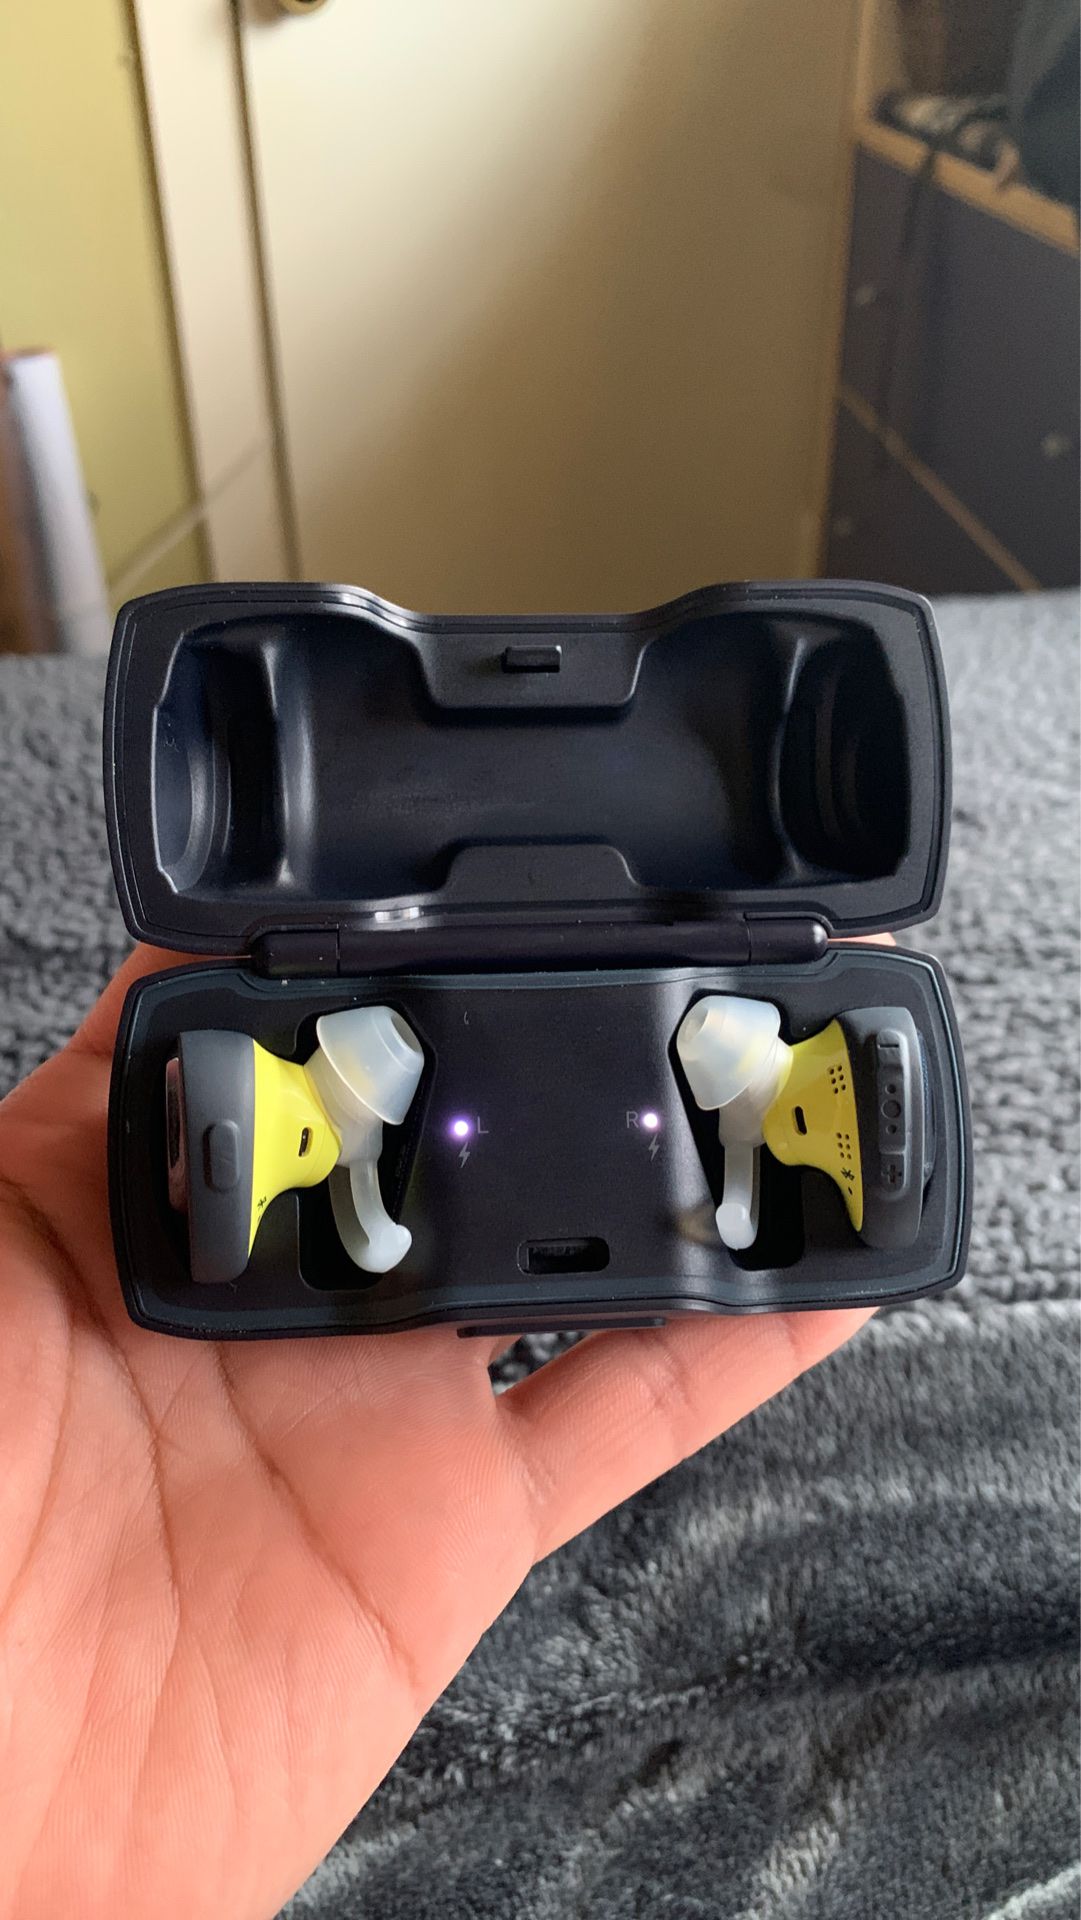 BOSE Wireless Earbuds with charging cable (NO ORIGINAL BOX INCLUDED)